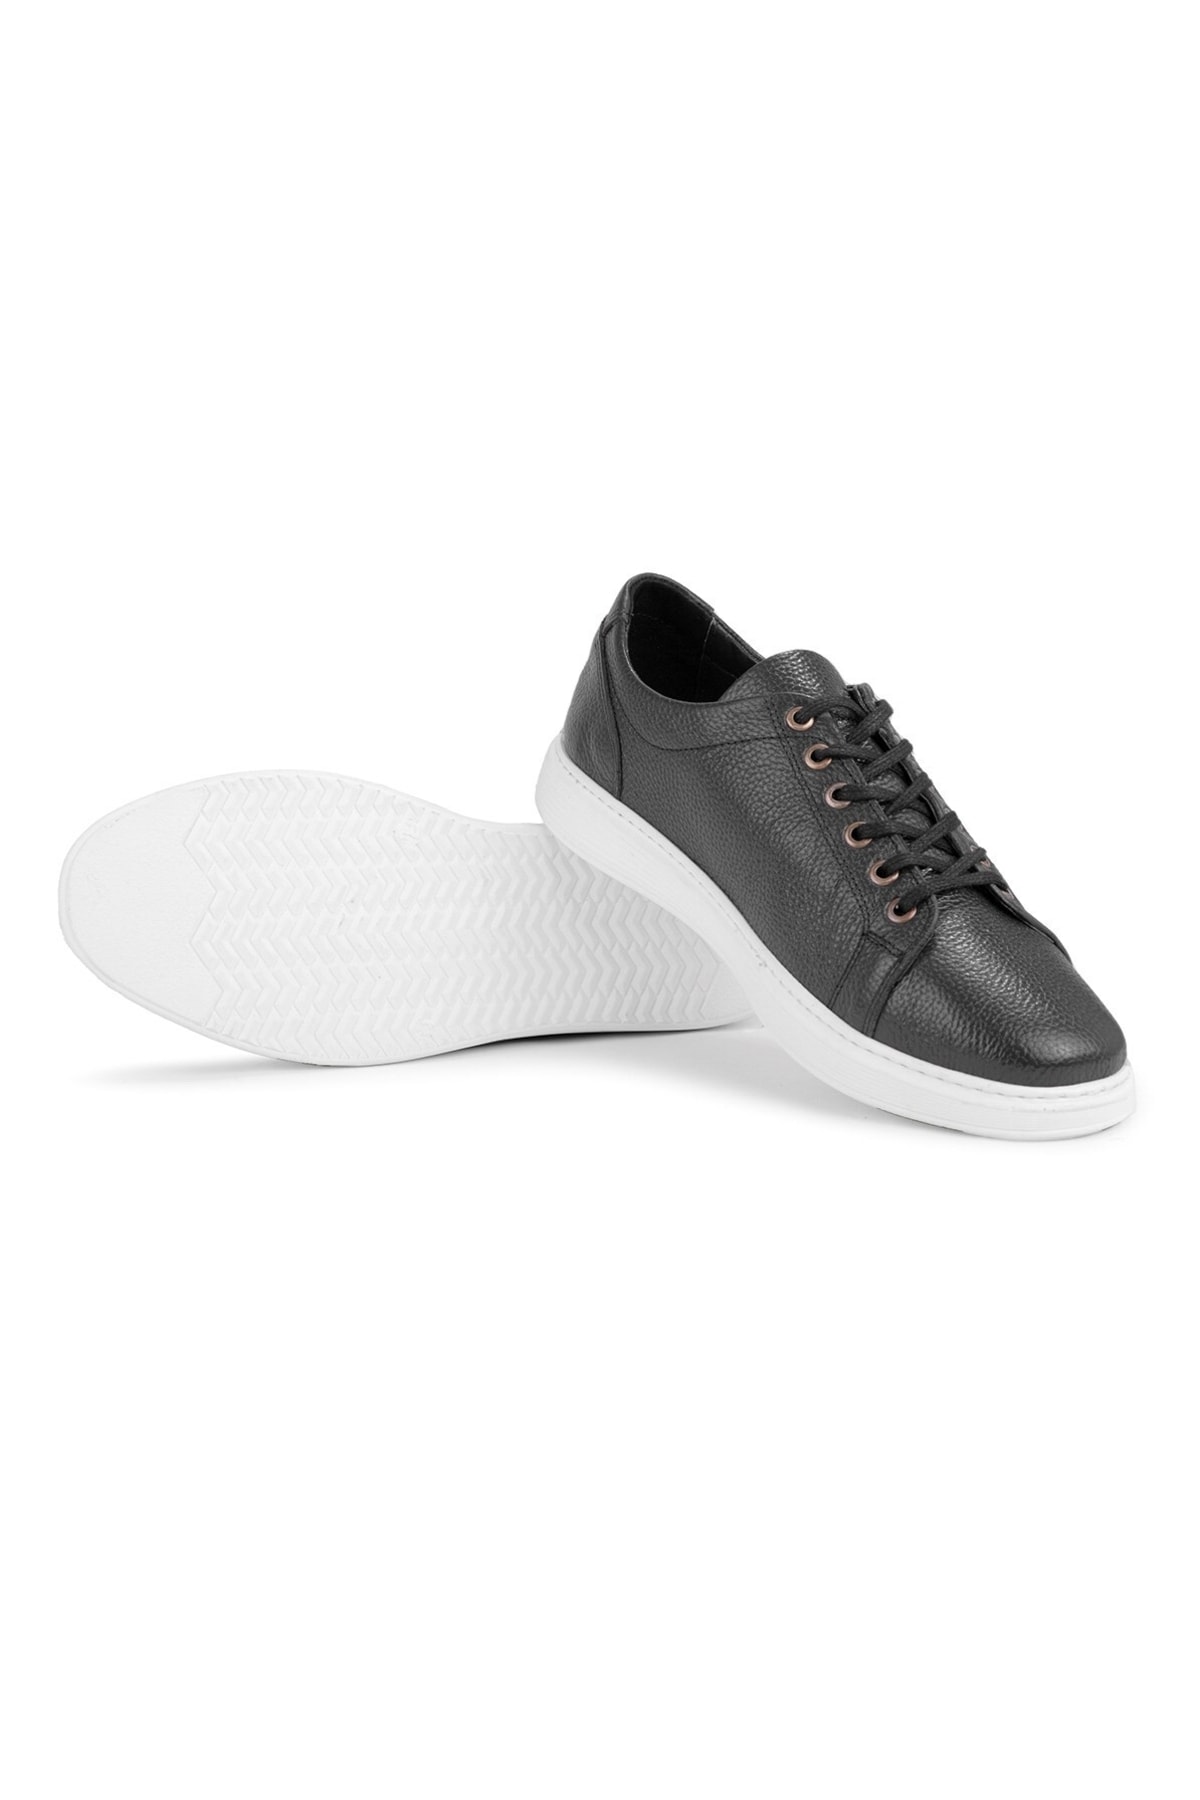 Ducavelli Verano Genuine Leather Men's Casual Shoes, Summer Sports Shoes, Lightweight Shoes Black. im Sale-ducavelli 1